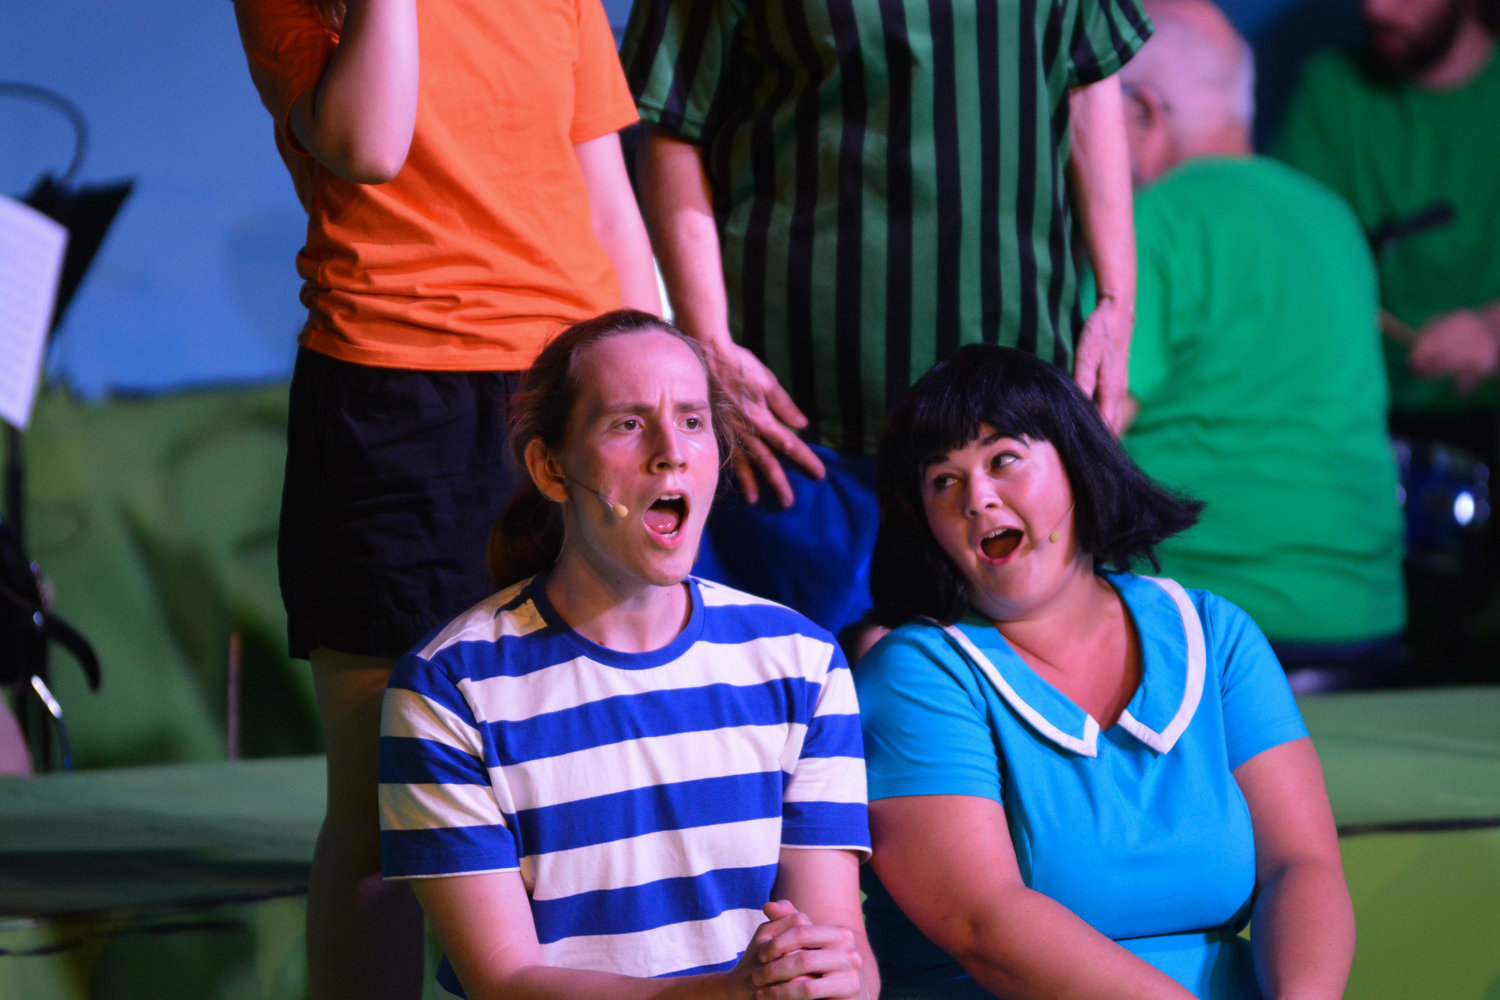 Actors portraying Schroeder and Lucy Van Pelt harmonize together during a song on Thursday, July 28.